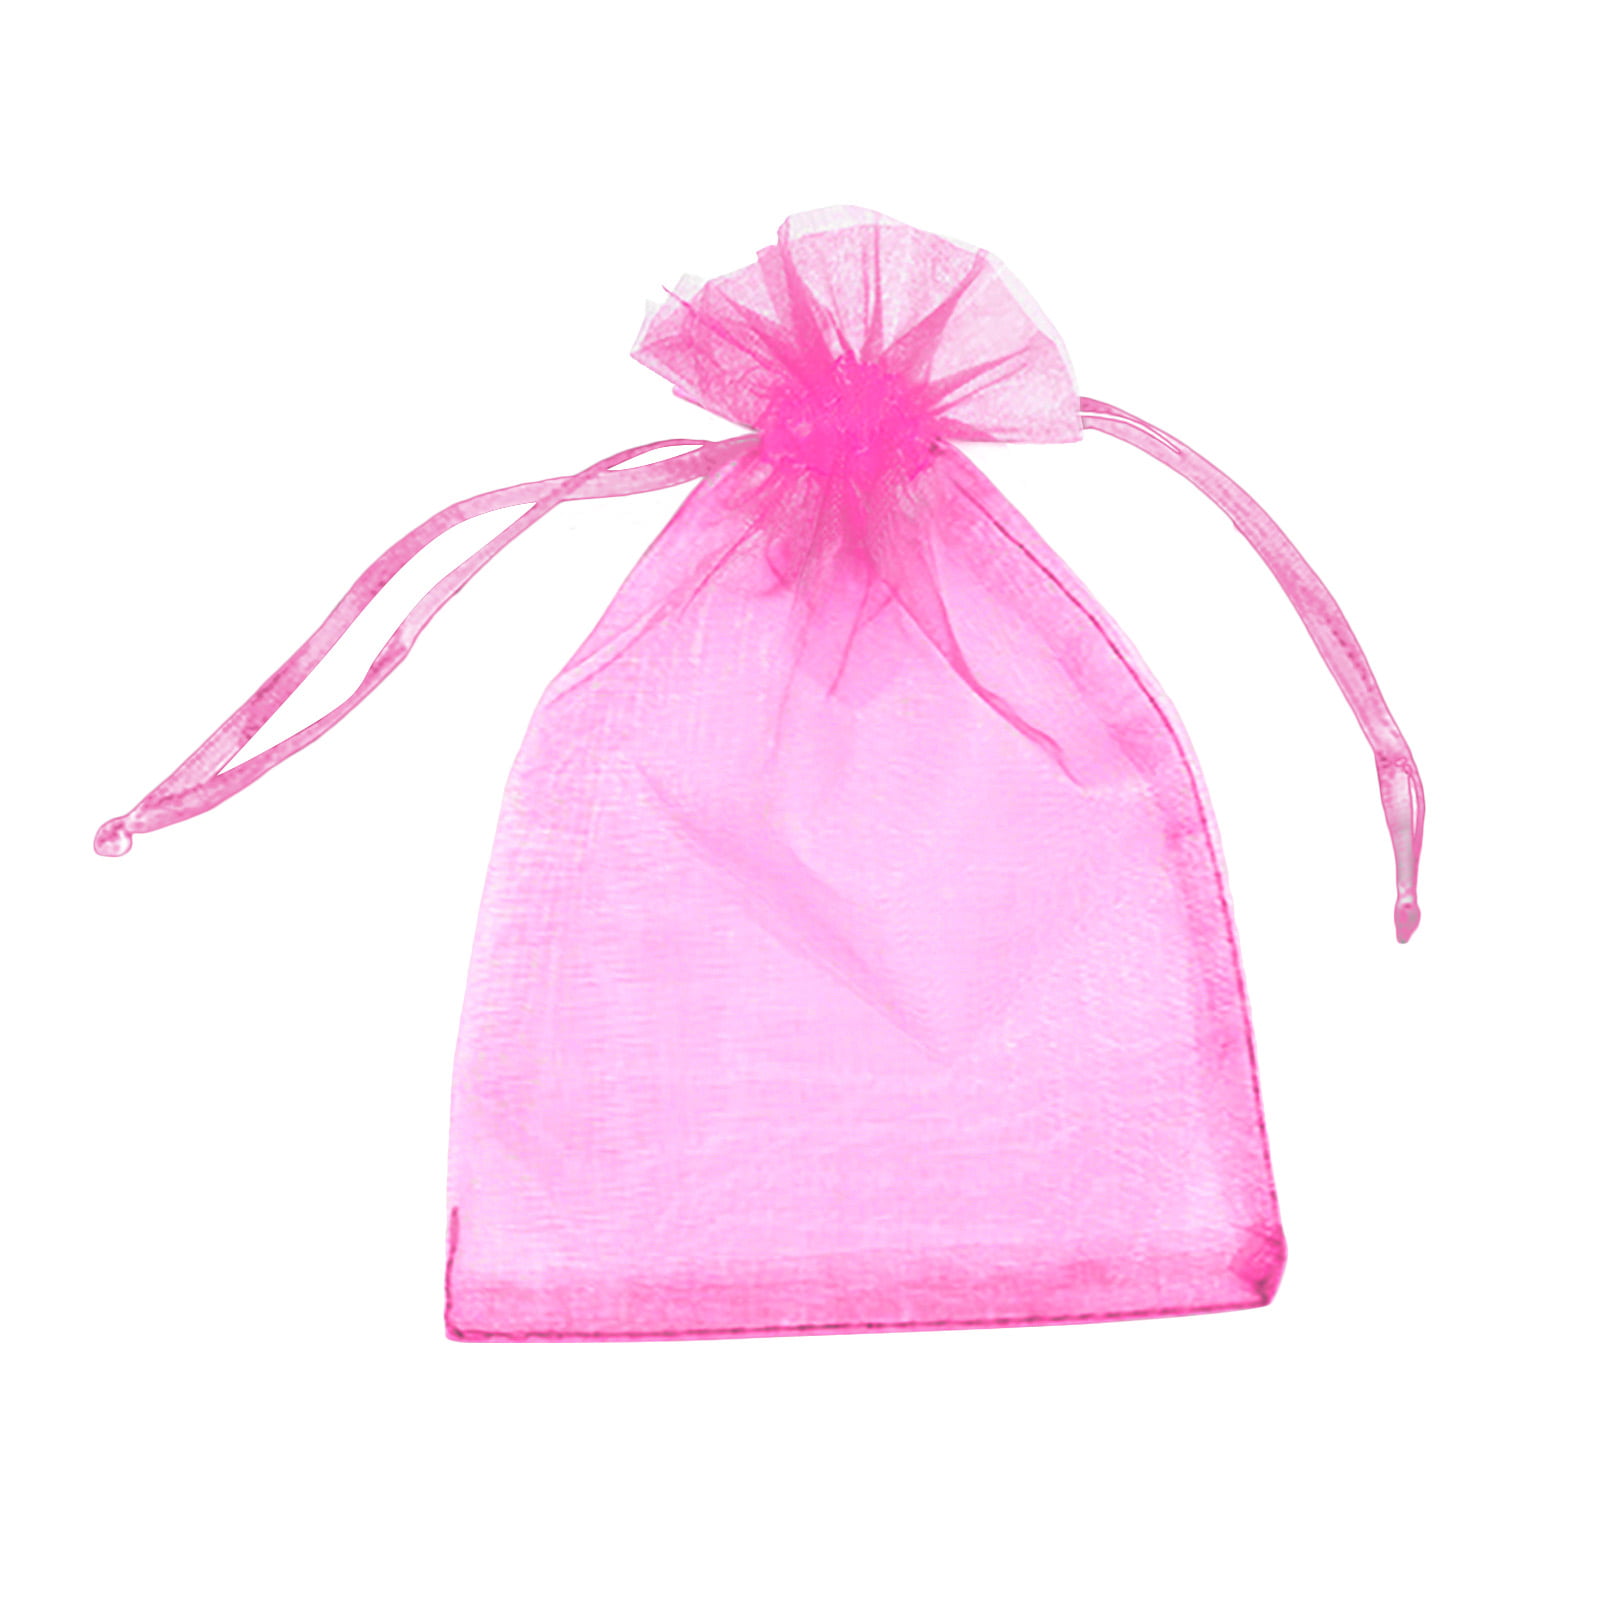 Details about   100Pcs Organza Gift Pouch Mixed Color Drawstring Jewelry Candy Bag Wedding Decor 